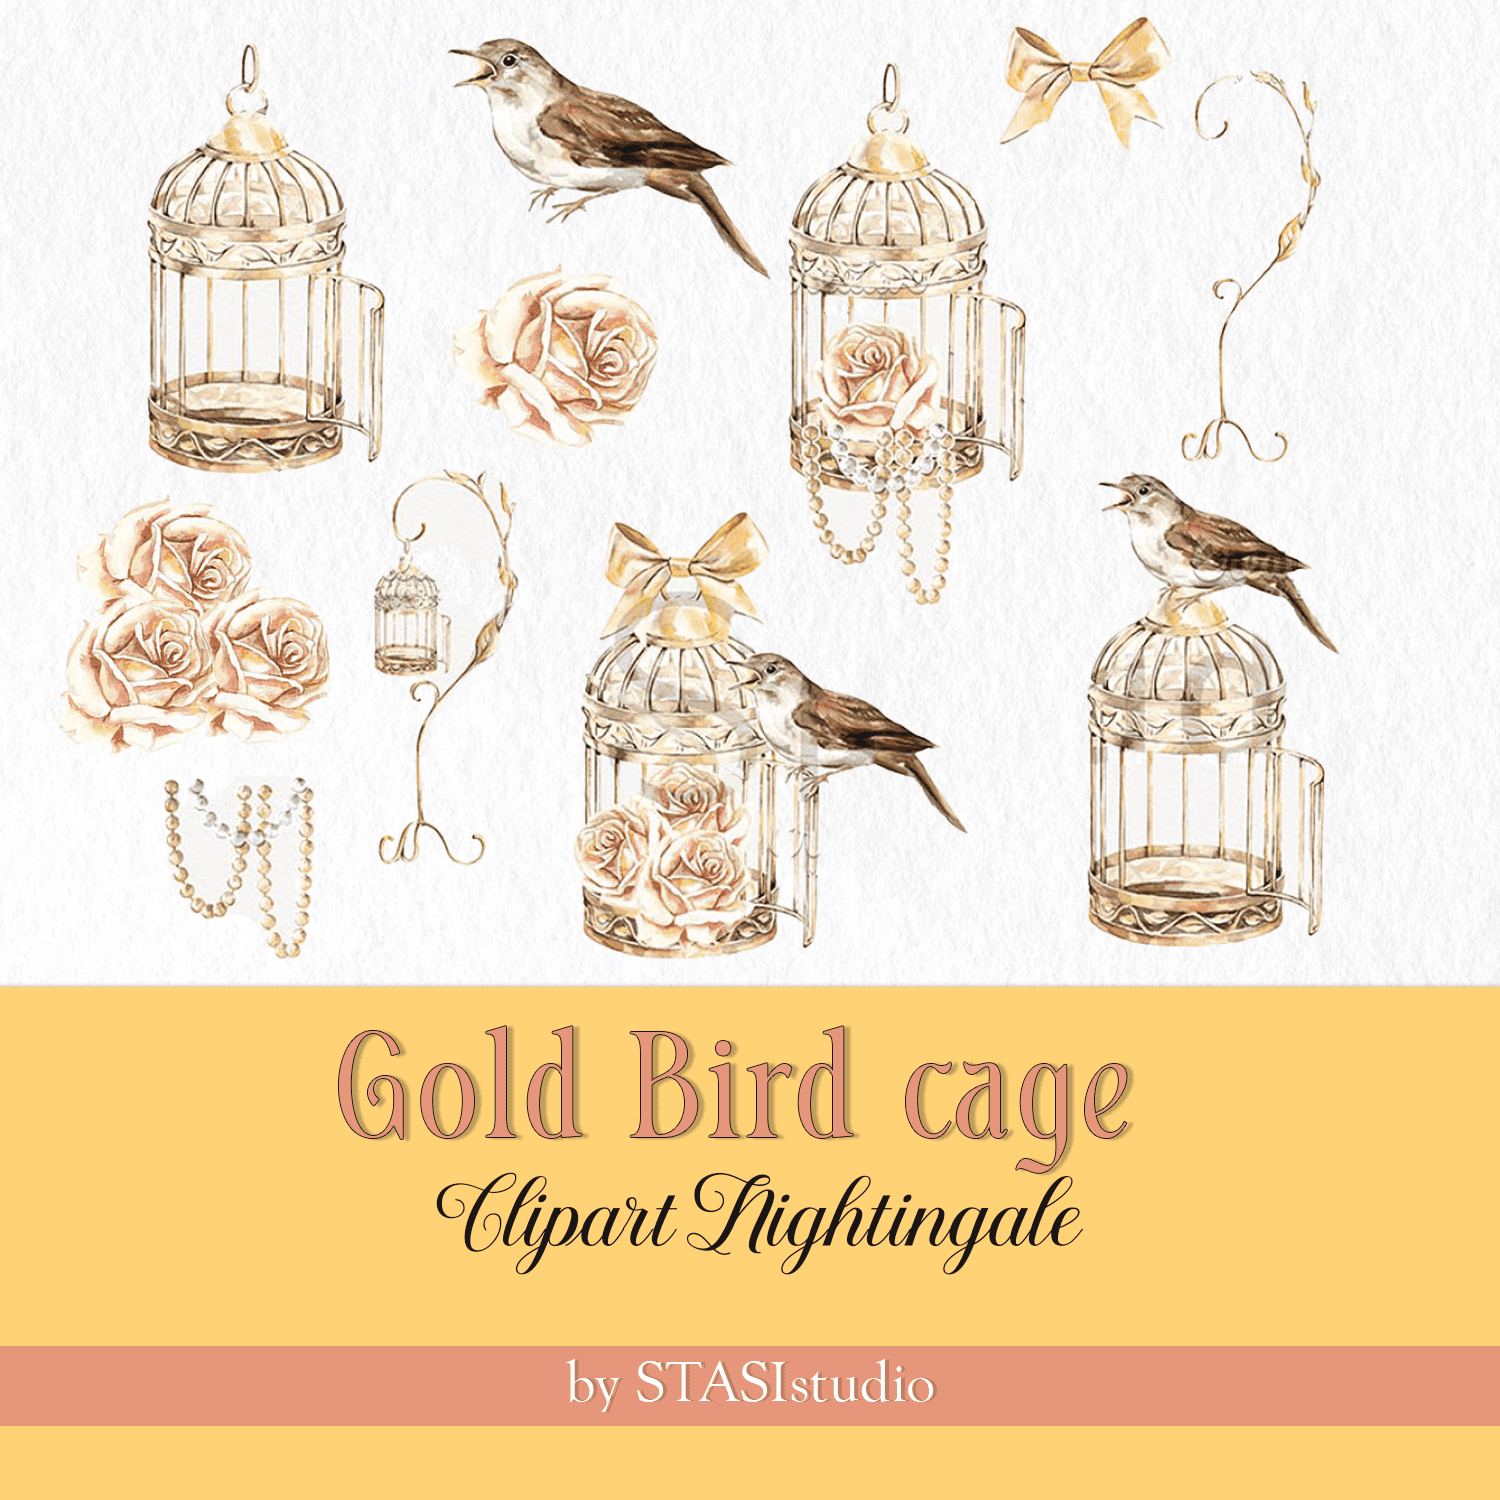 Gold Bird cage Clipart Nightingale cover.